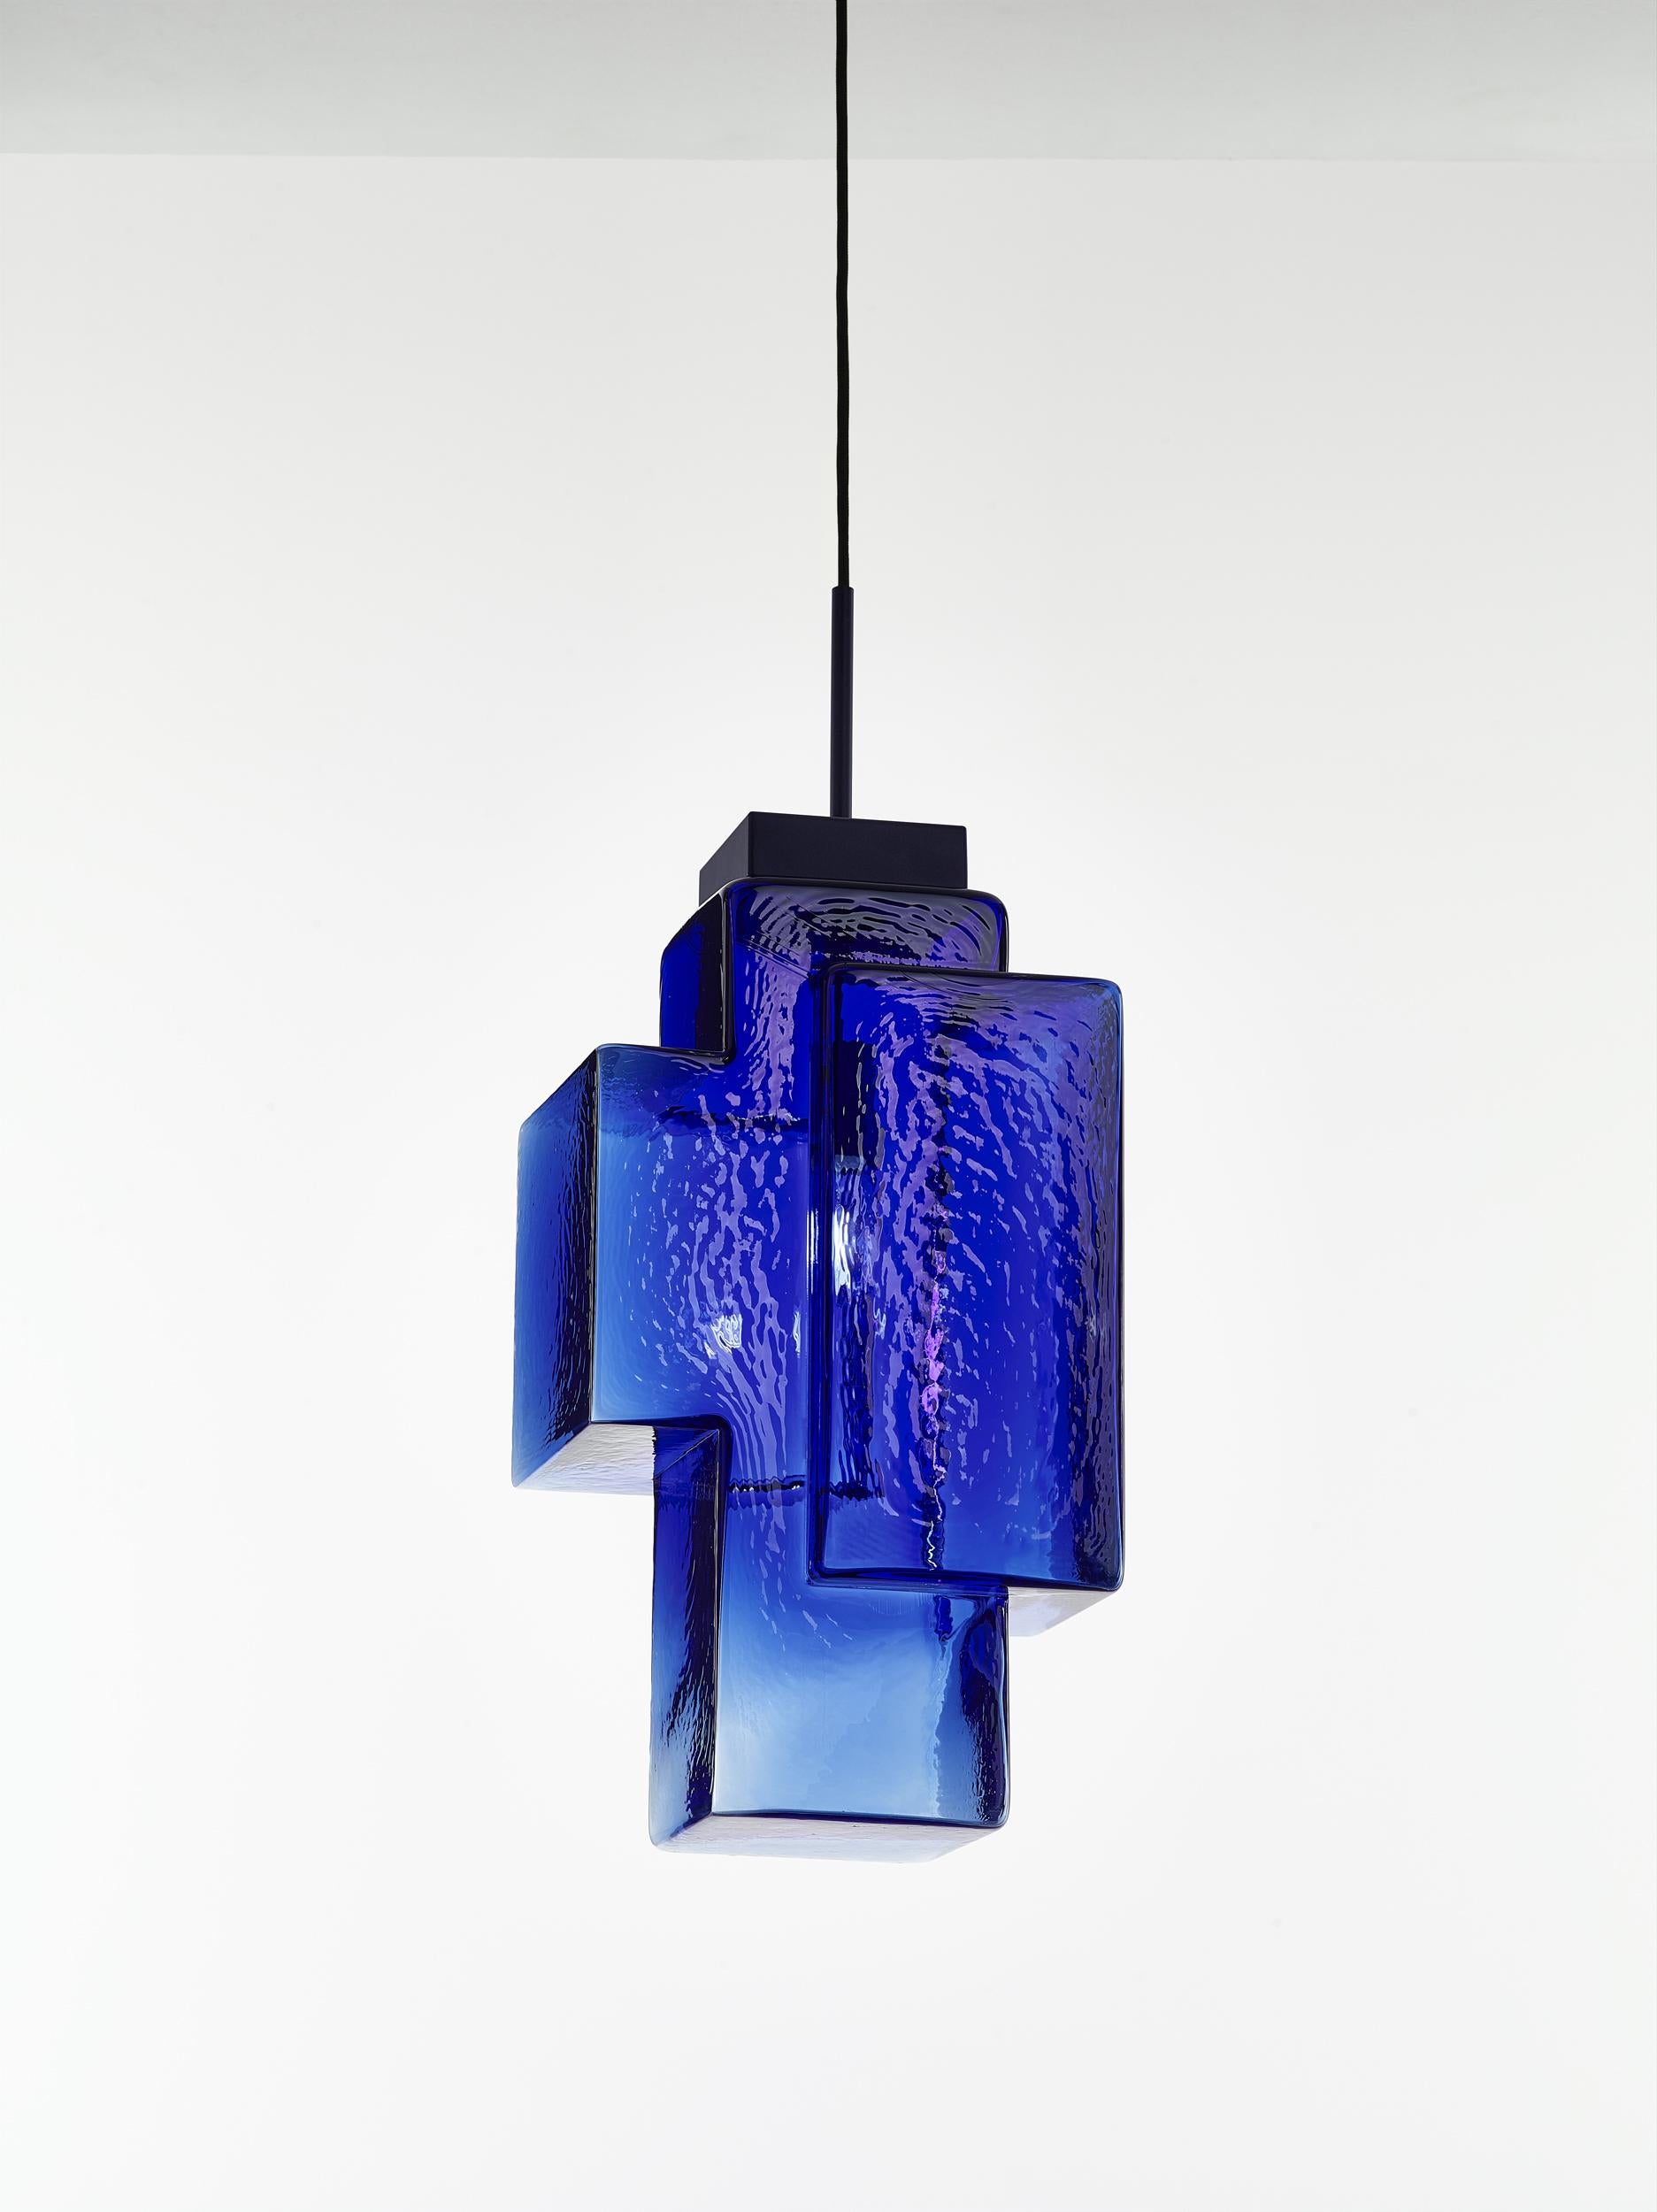 Cobalt blue Tetris pendant light by Dechem Studio
Dimensions: W 30 x D 23 x H 200 cm
Materials: metal, glass.
Also available: different colours available.

In this complex lighting fixture, strict geometric and architectural lines contrast with